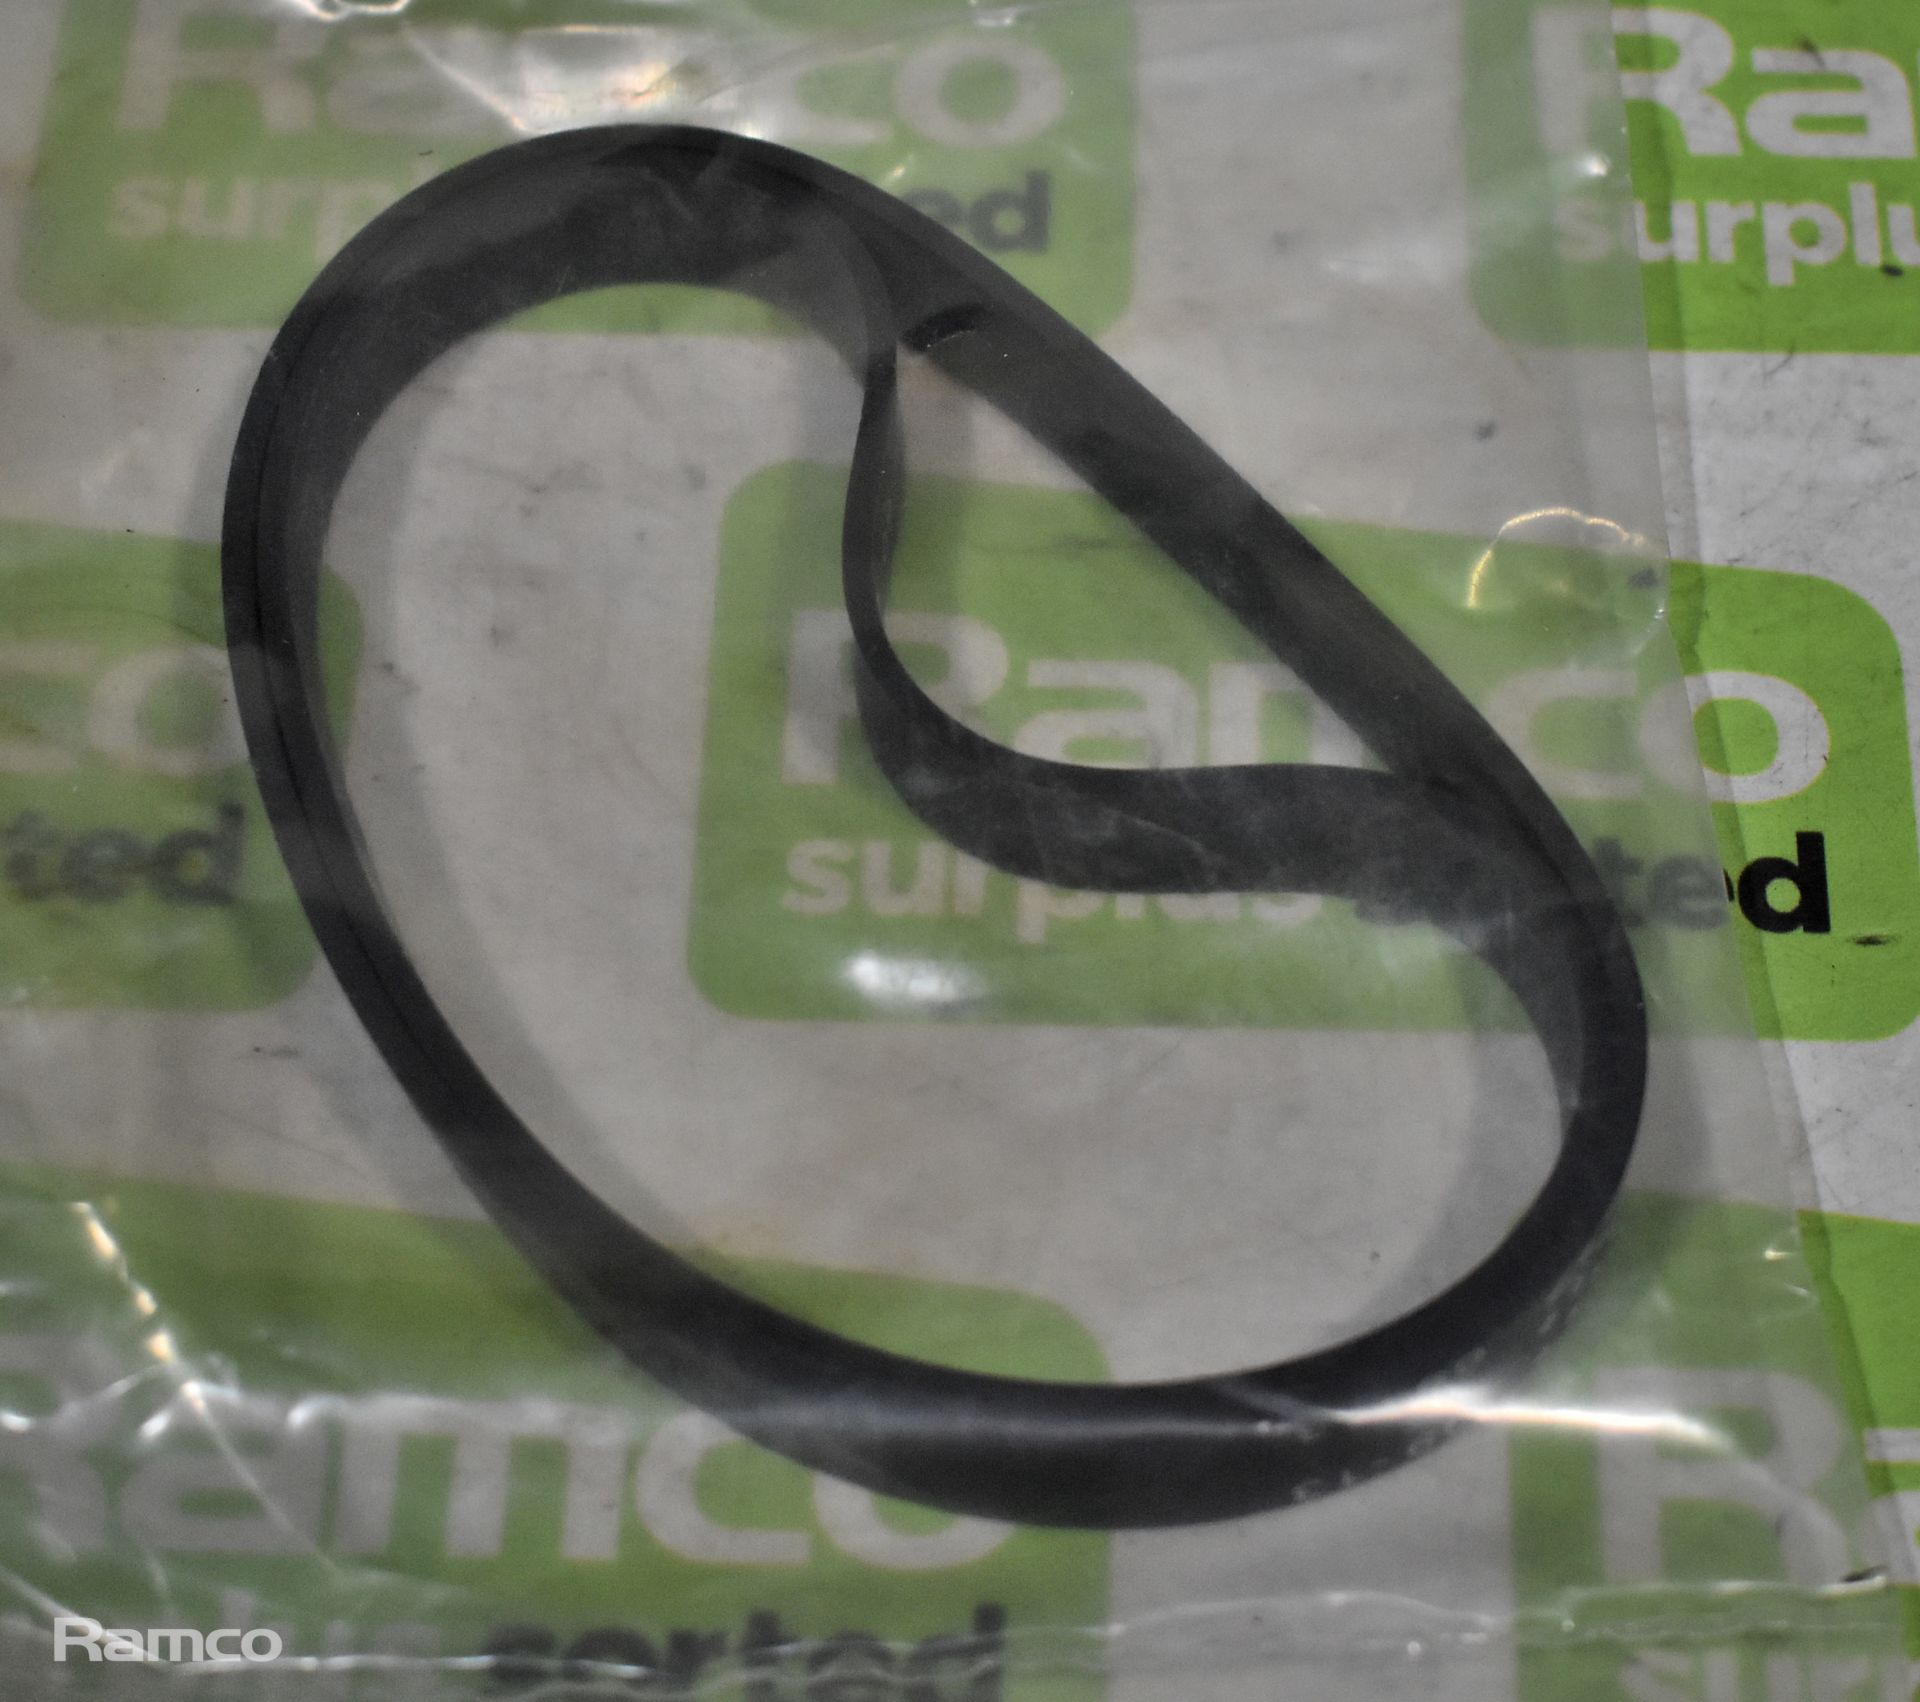 5x packs of Electrolux drive belts - Image 2 of 3